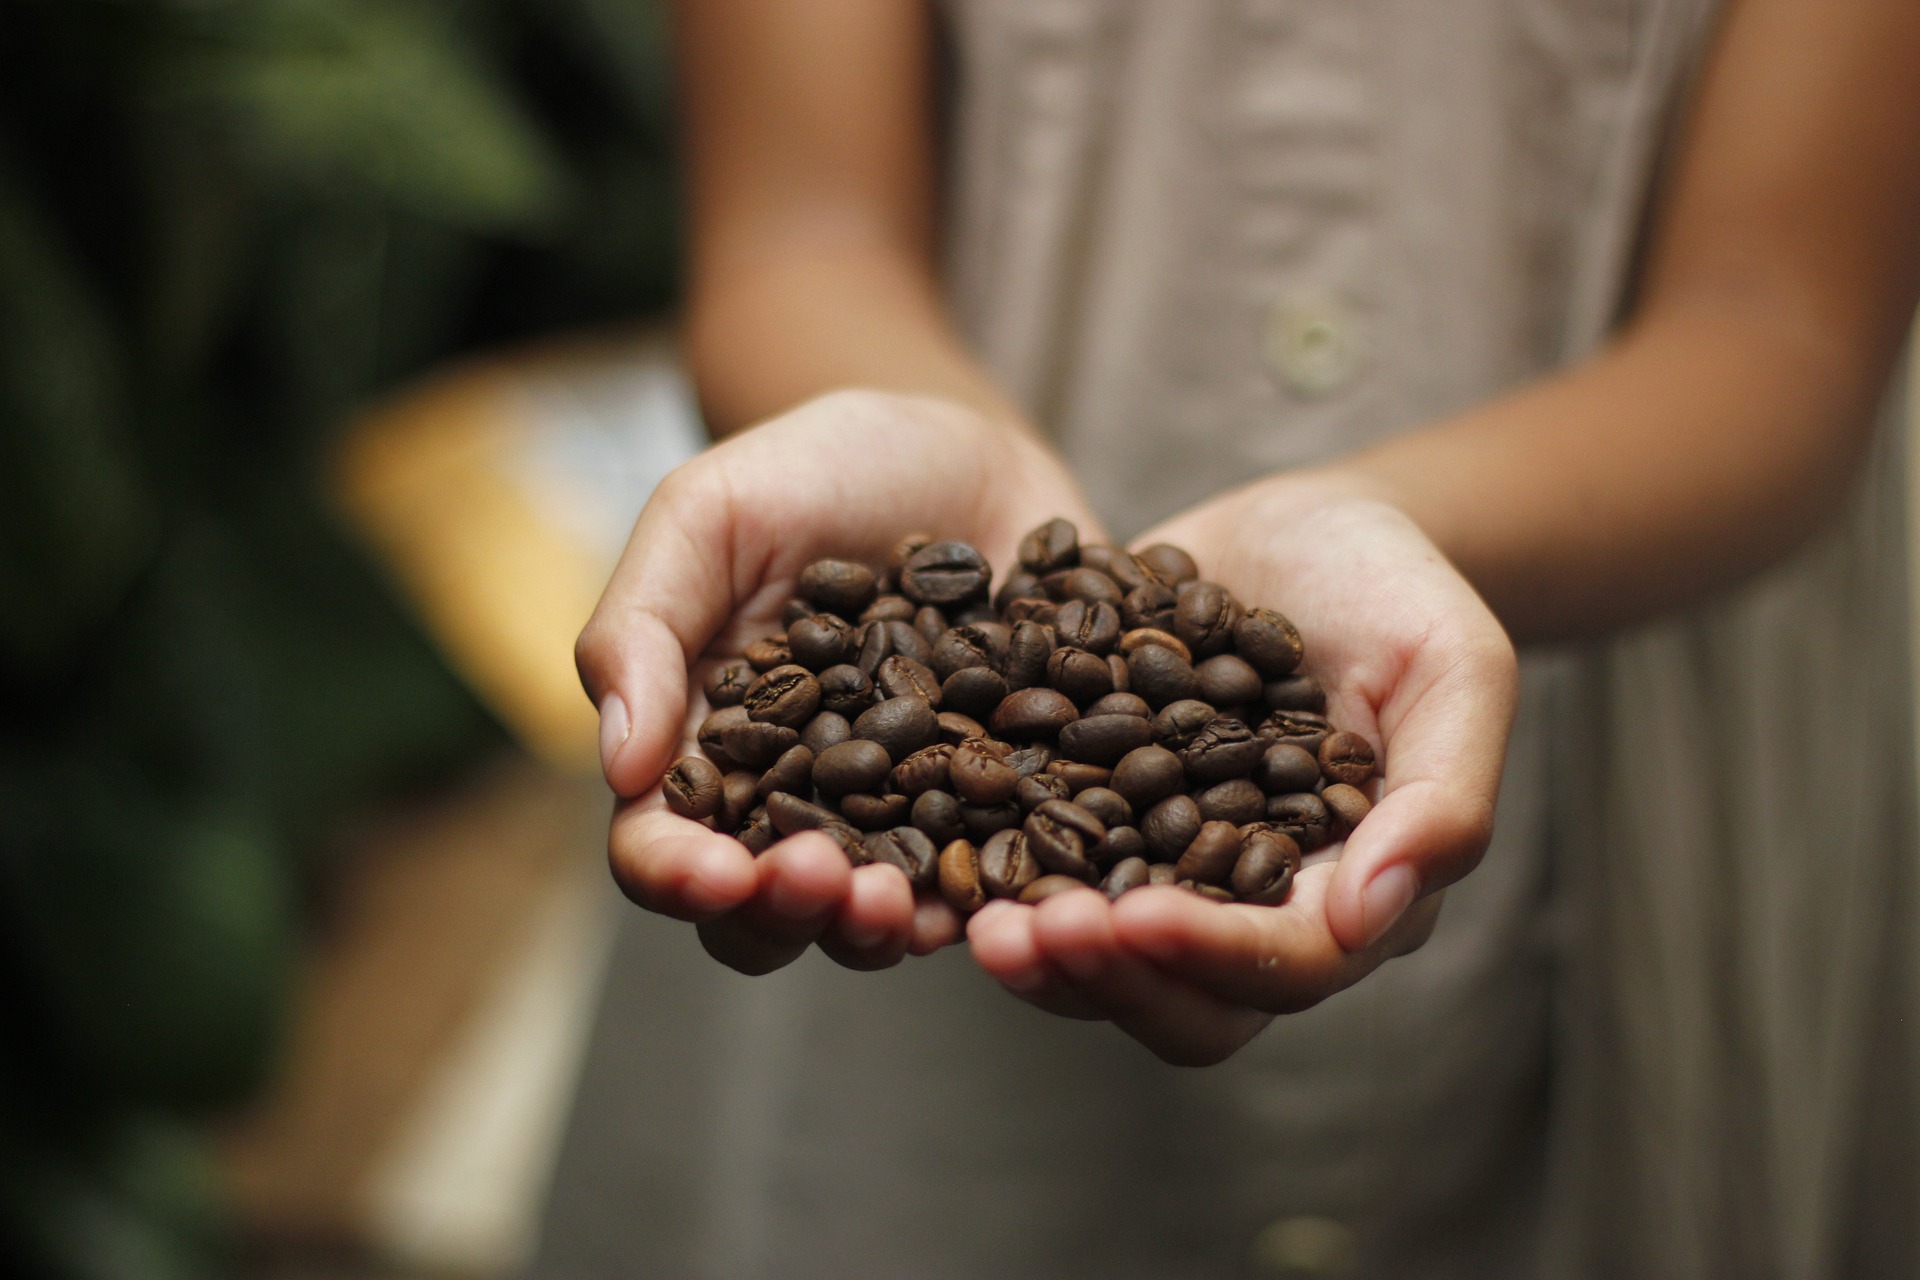 Holding coffee beans from Blue Mountain in Jamaica